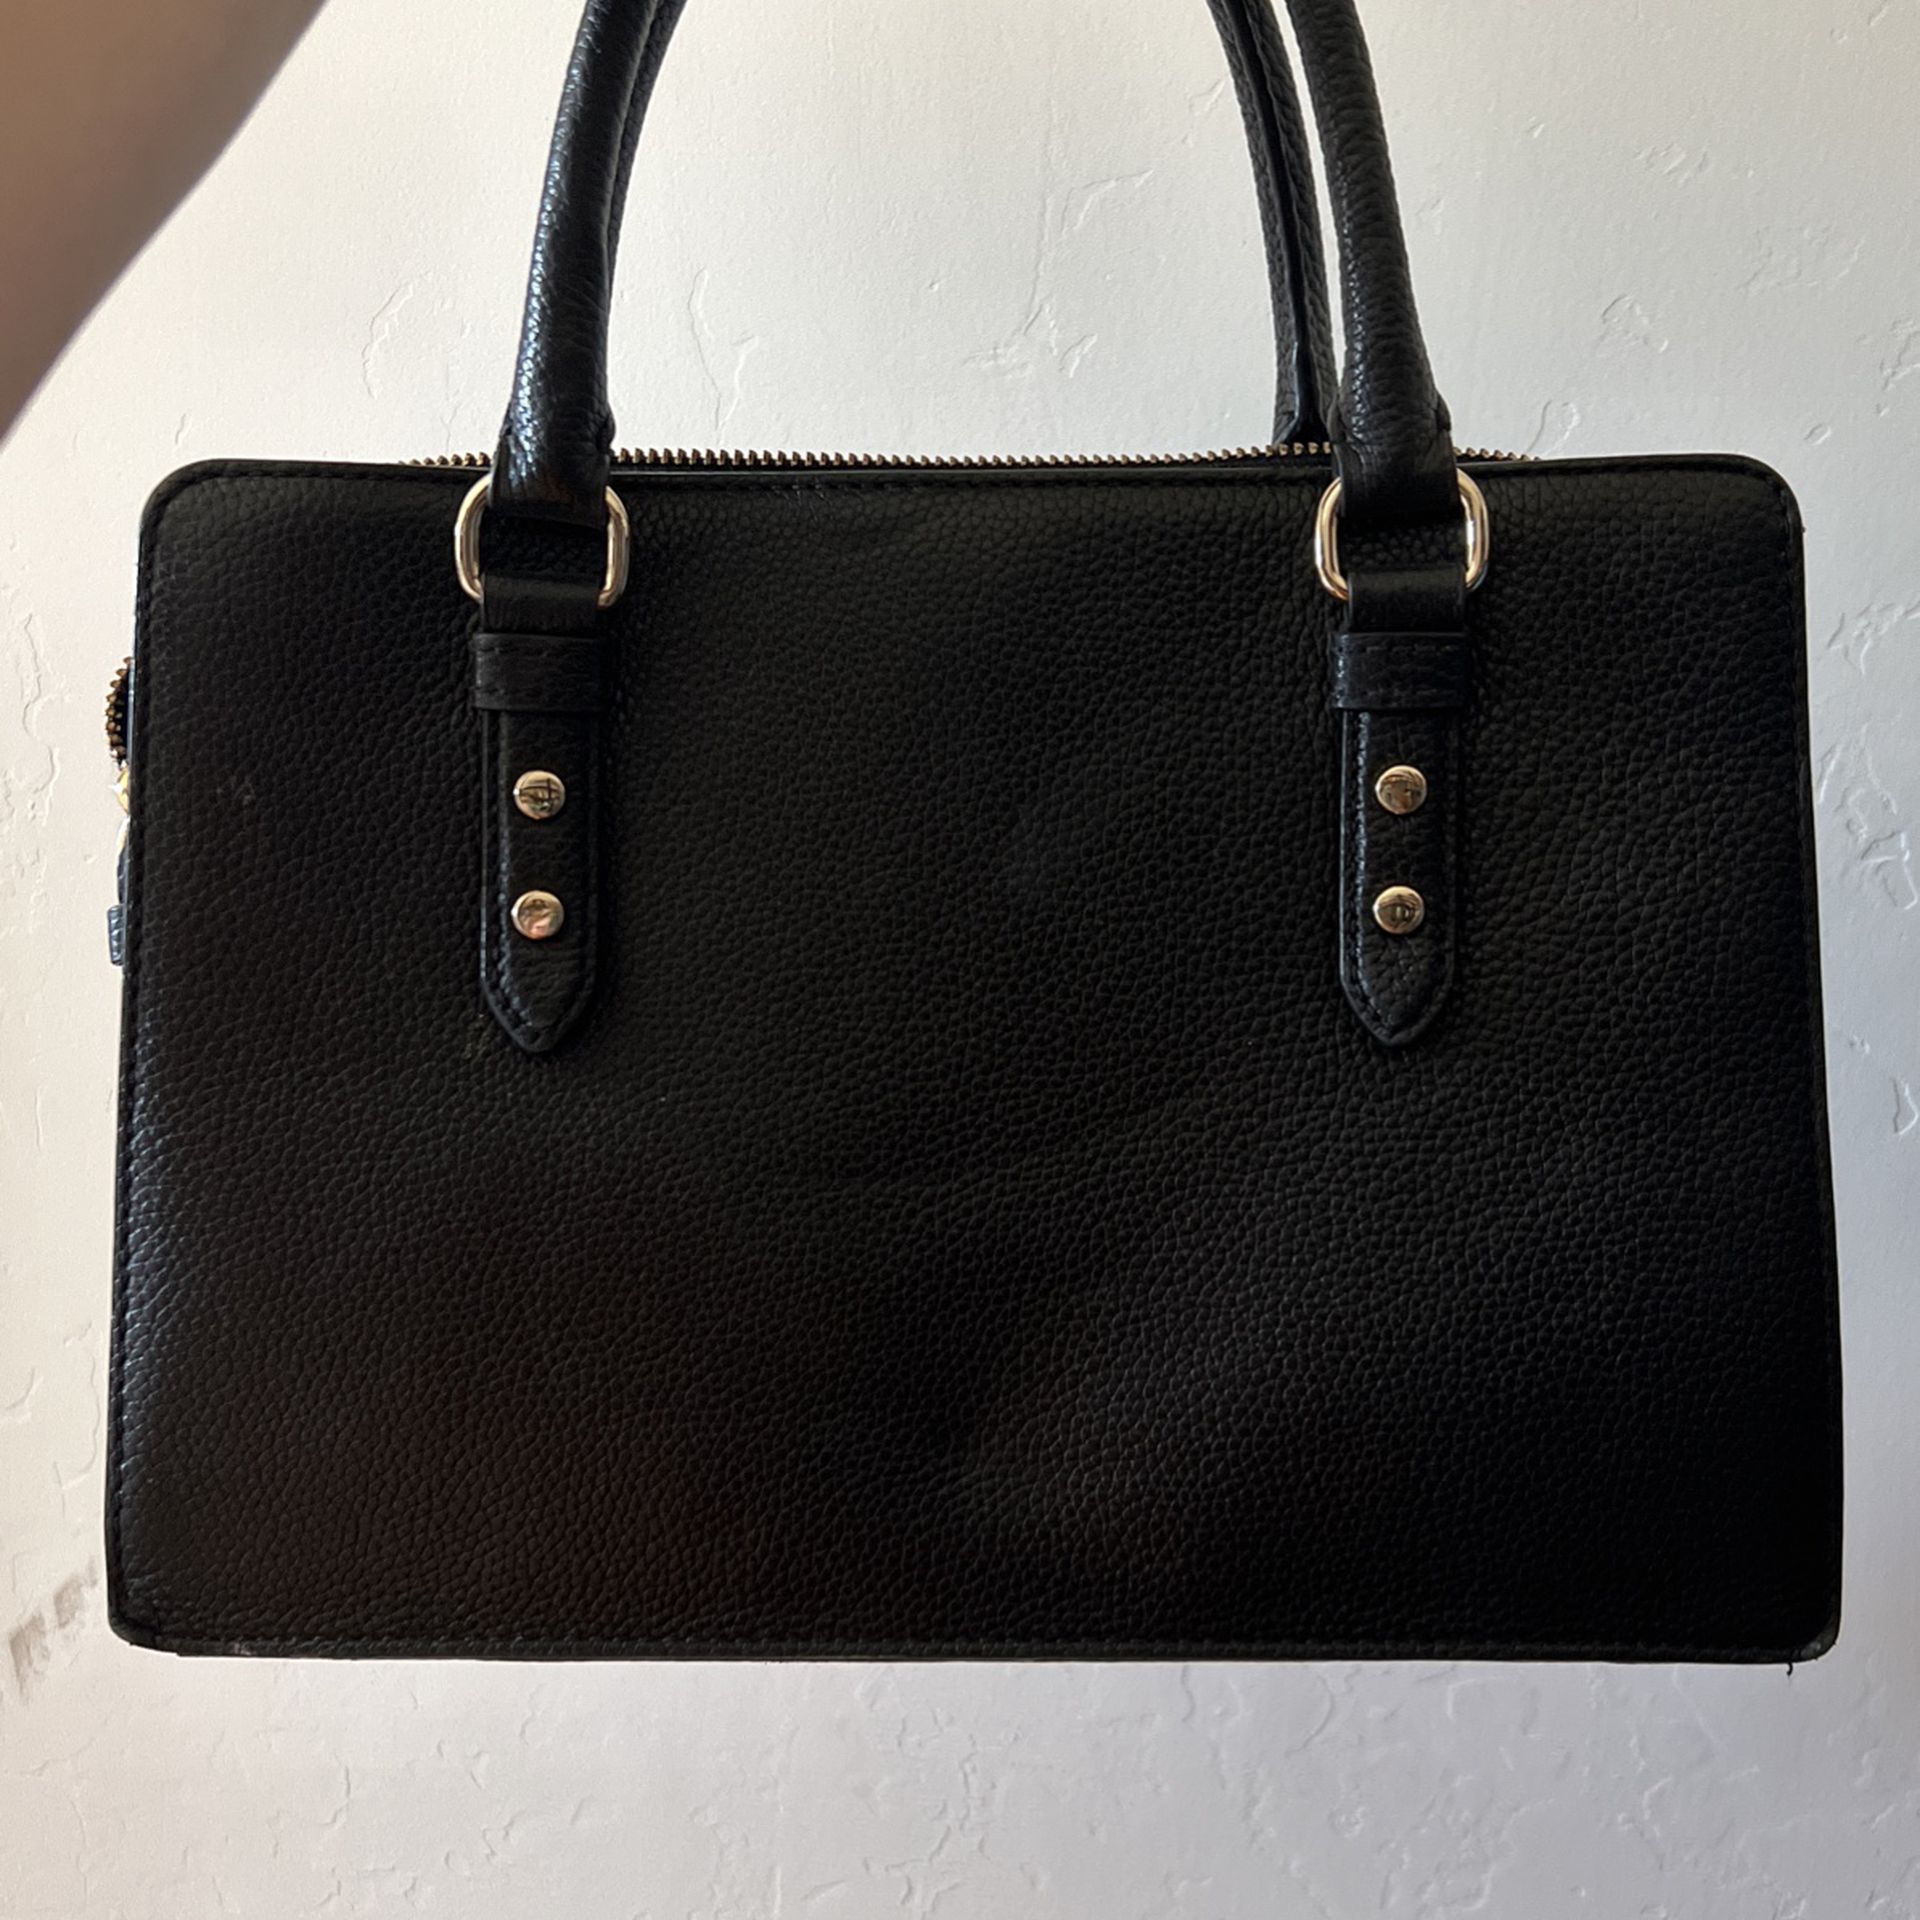 Kate Spade Classic Black Bag for Sale in Bakersfield, CA - OfferUp